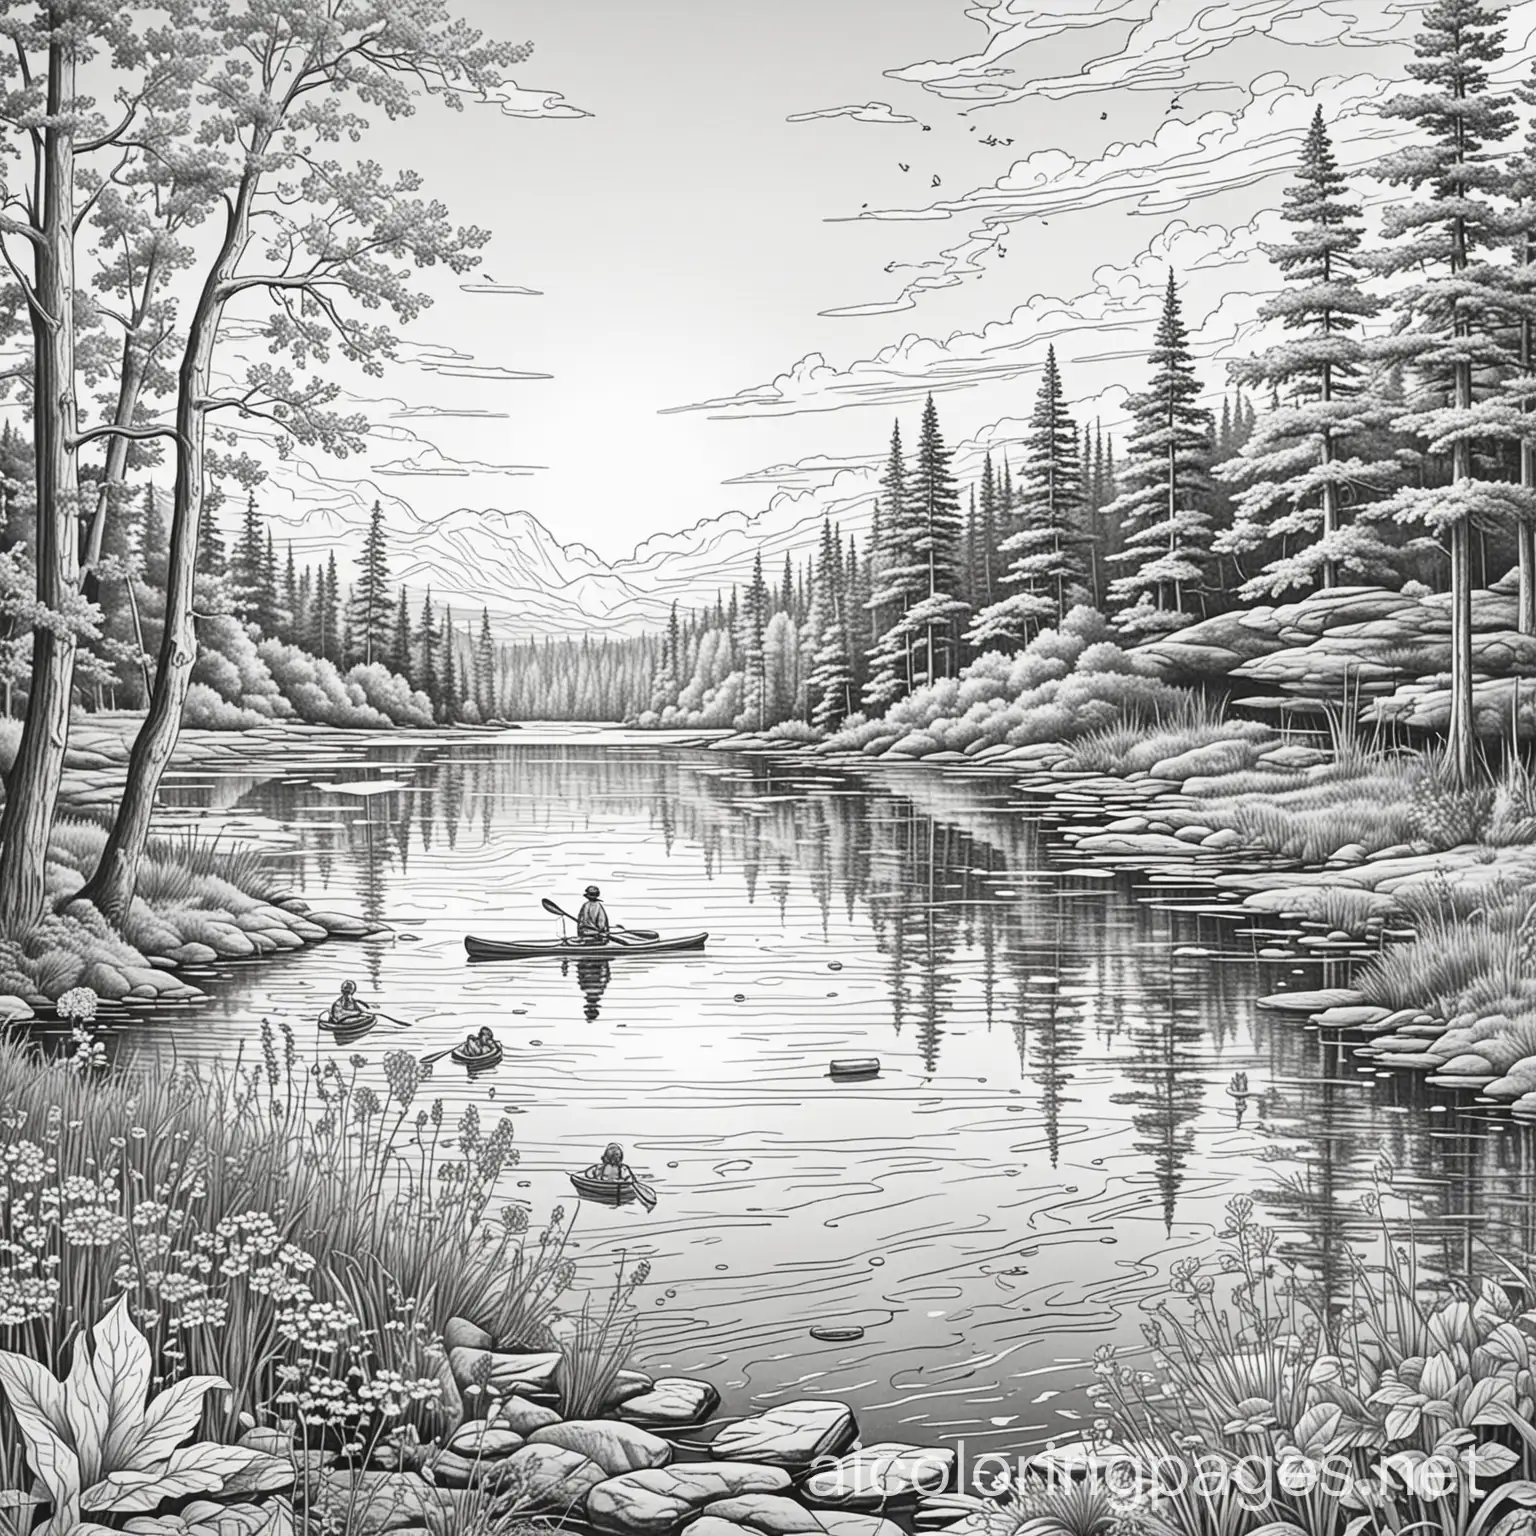 Make a bold black and white outlined coloring page of vintage summer lake. NO TREES IN THE IMAGE. Black figure with no district features or shape on board with a paddle. Sun reflecting on the water making it glimmer. With a diverse set of nature such as different types of plants and flowers. No trees. Make a sun in the sky. Make the lake over 75% of the image. I don't want it to take up a majority of the image. No trees. NO TREES., Coloring Page, black and white, line art, white background, Simplicity, Ample White Space. The background of the coloring page is plain white to make it easy for young children to color within the lines. The outlines of all the subjects are easy to distinguish, making it simple for kids to color without too much difficulty